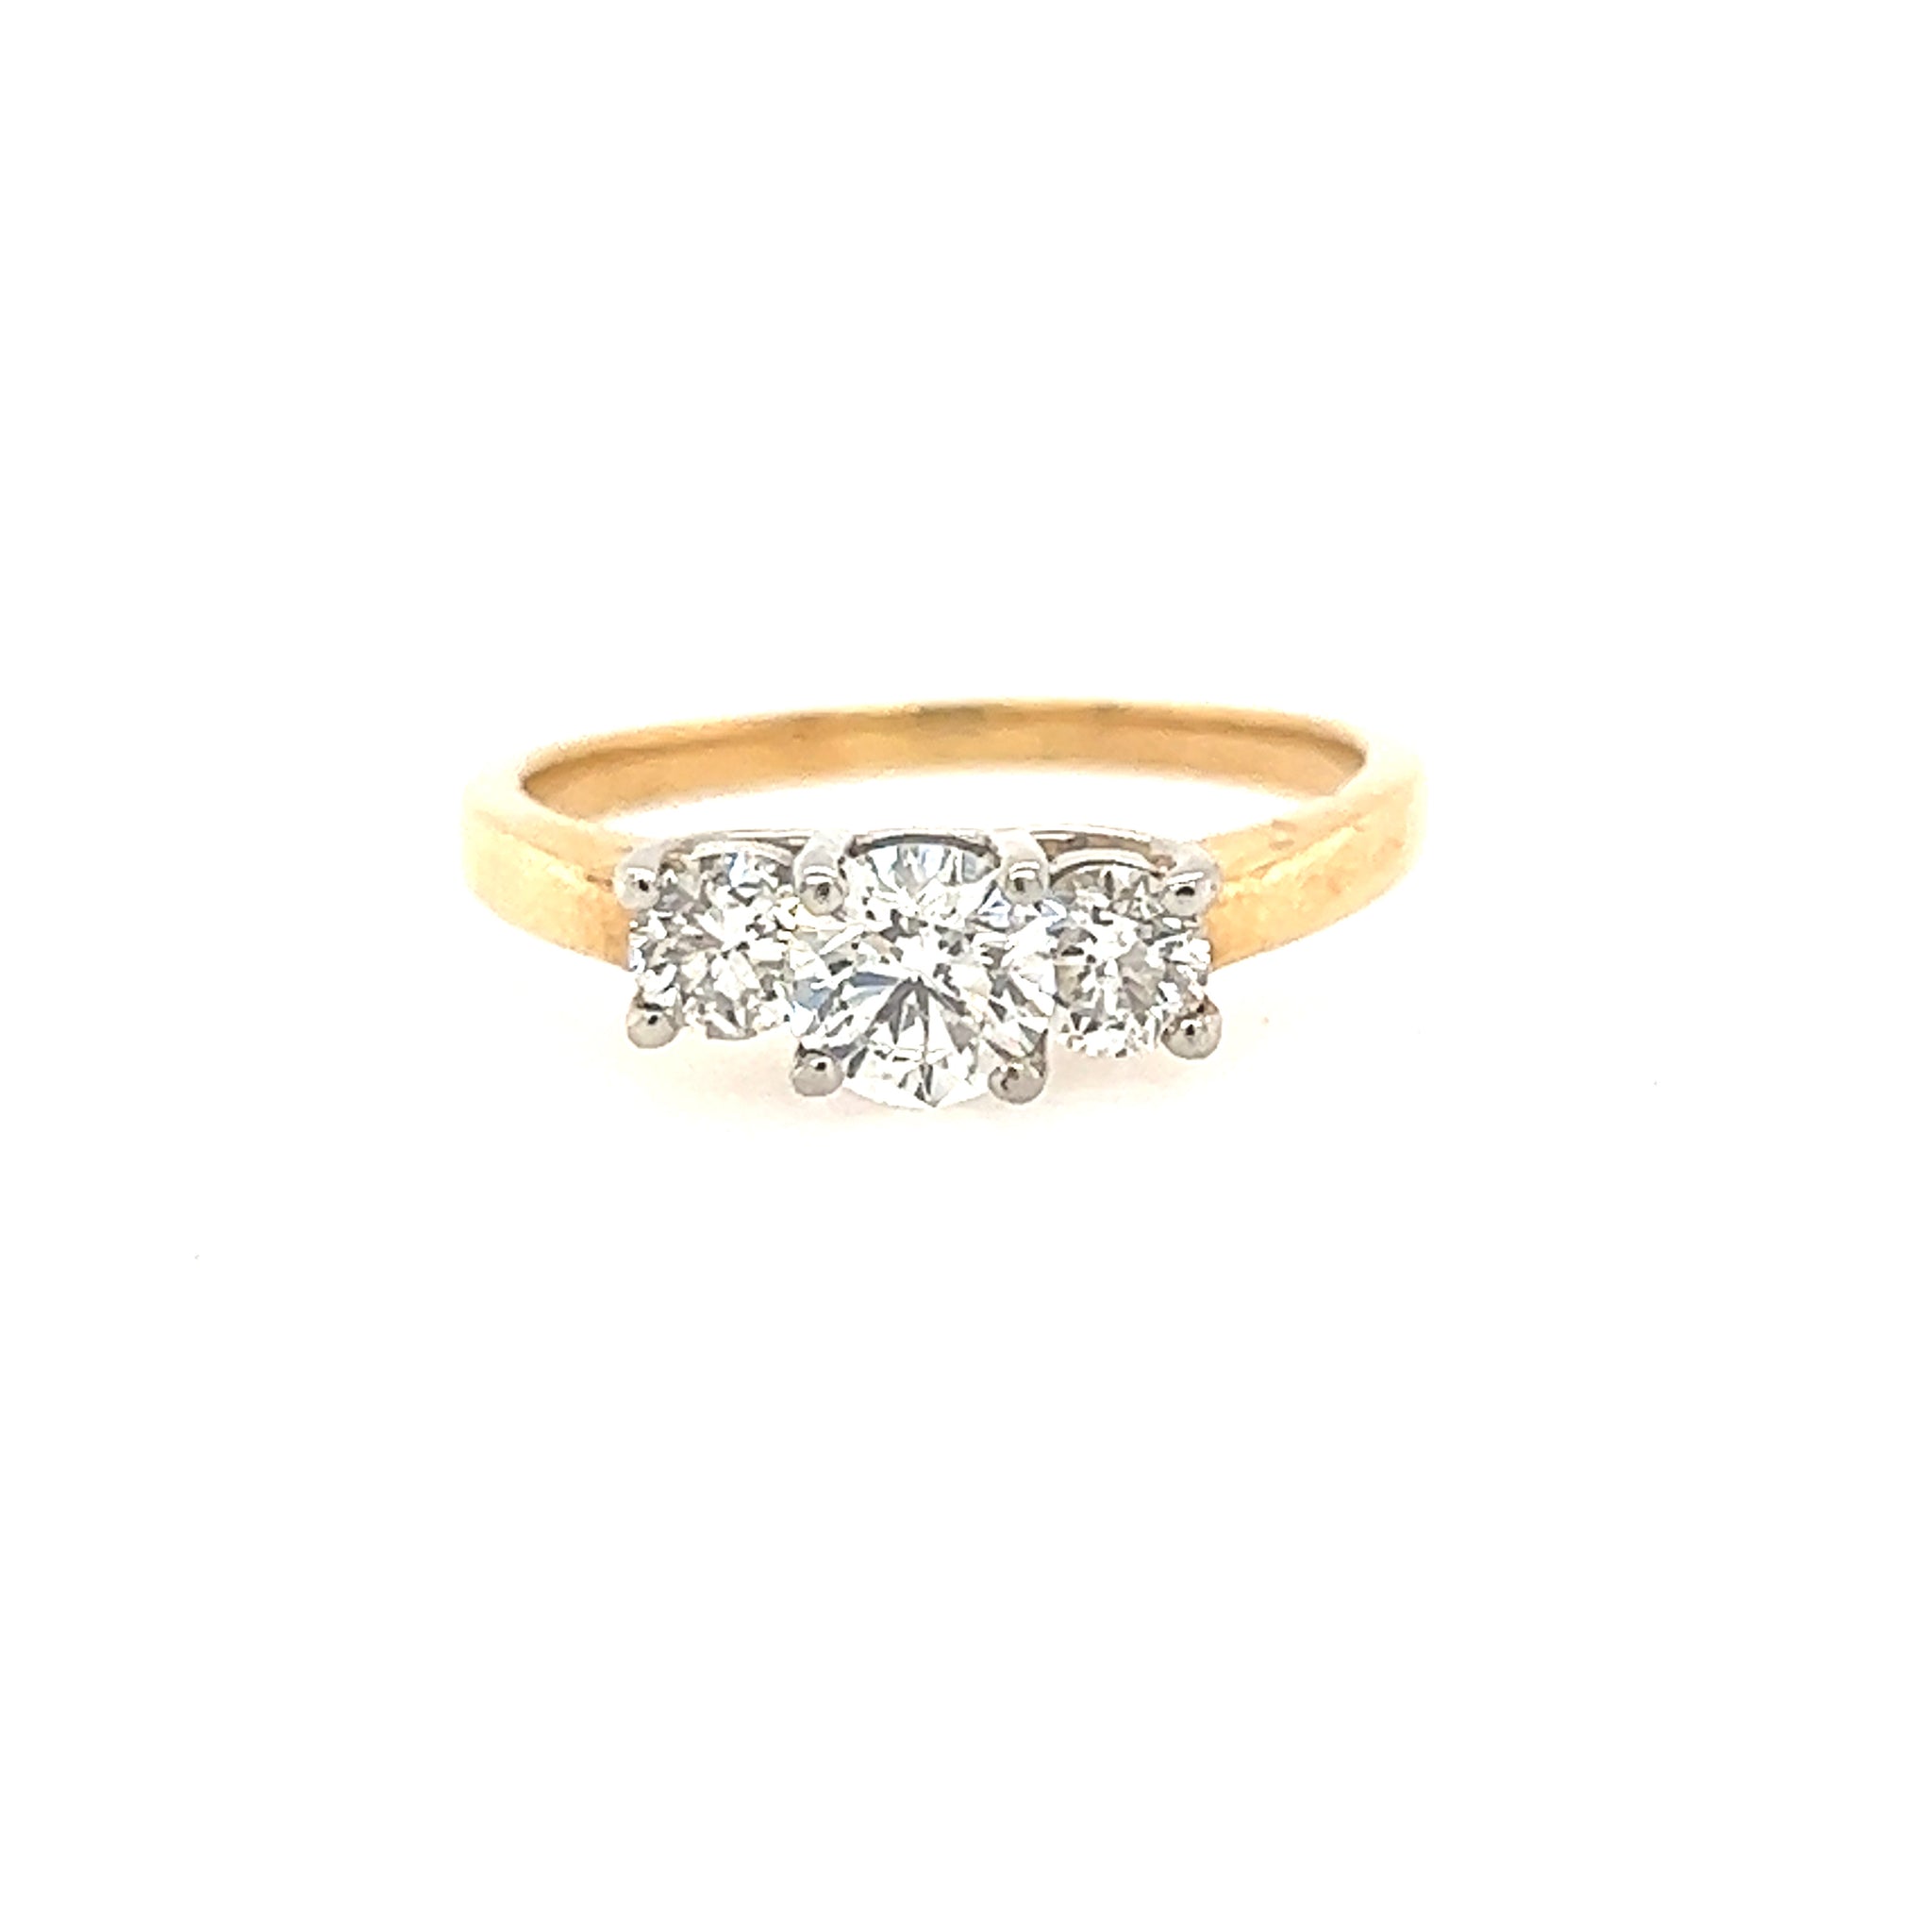 14K Yellow Gold and Platinum Three Diamond (Approximate 0.90-carat) Engagement Ring Size 7 1/2 US